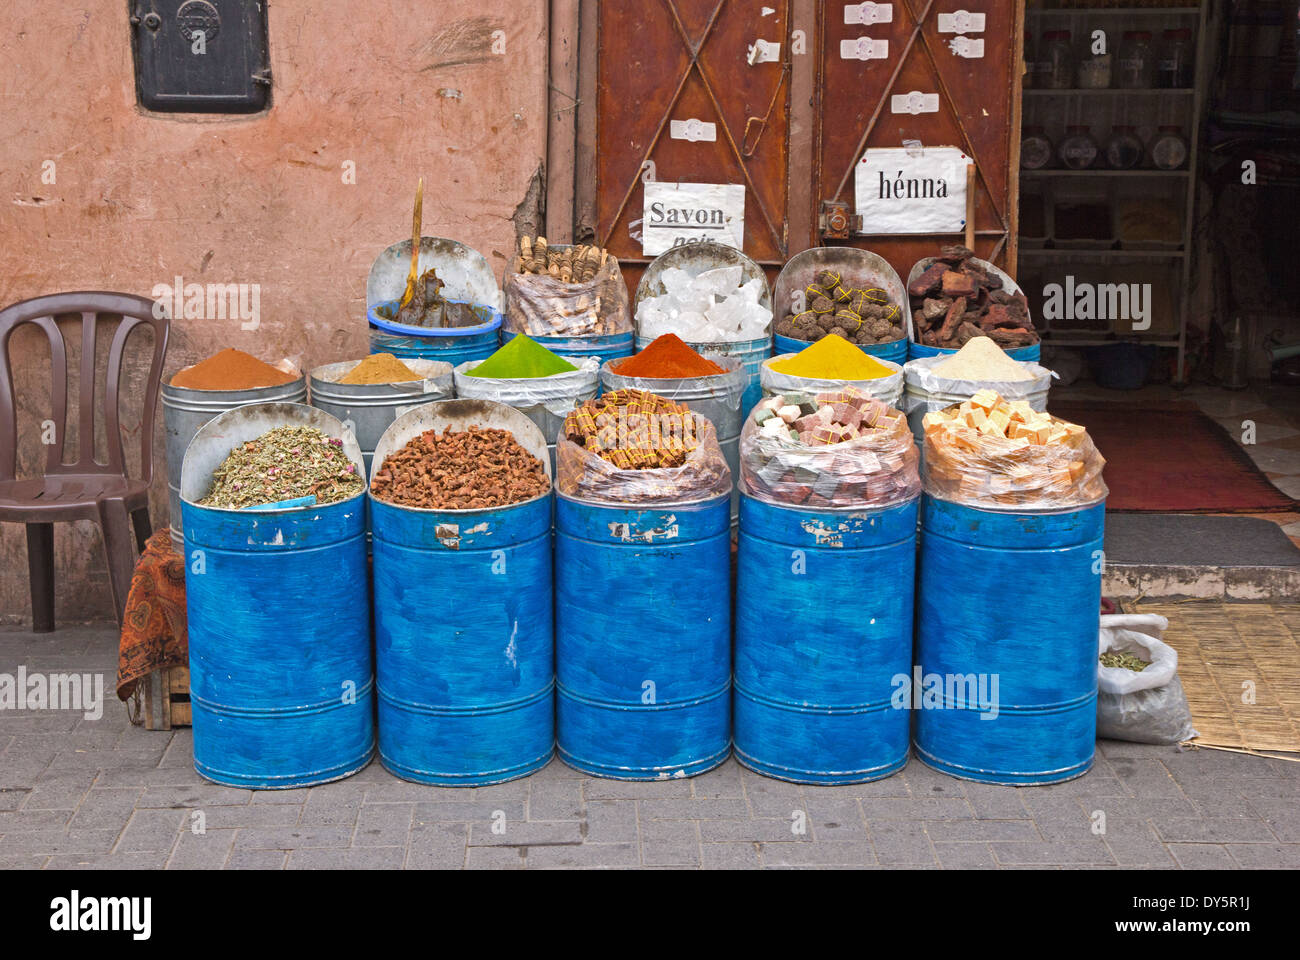 Herbs and spices on sale in souk, Marrakech, Morocco Stock Photo